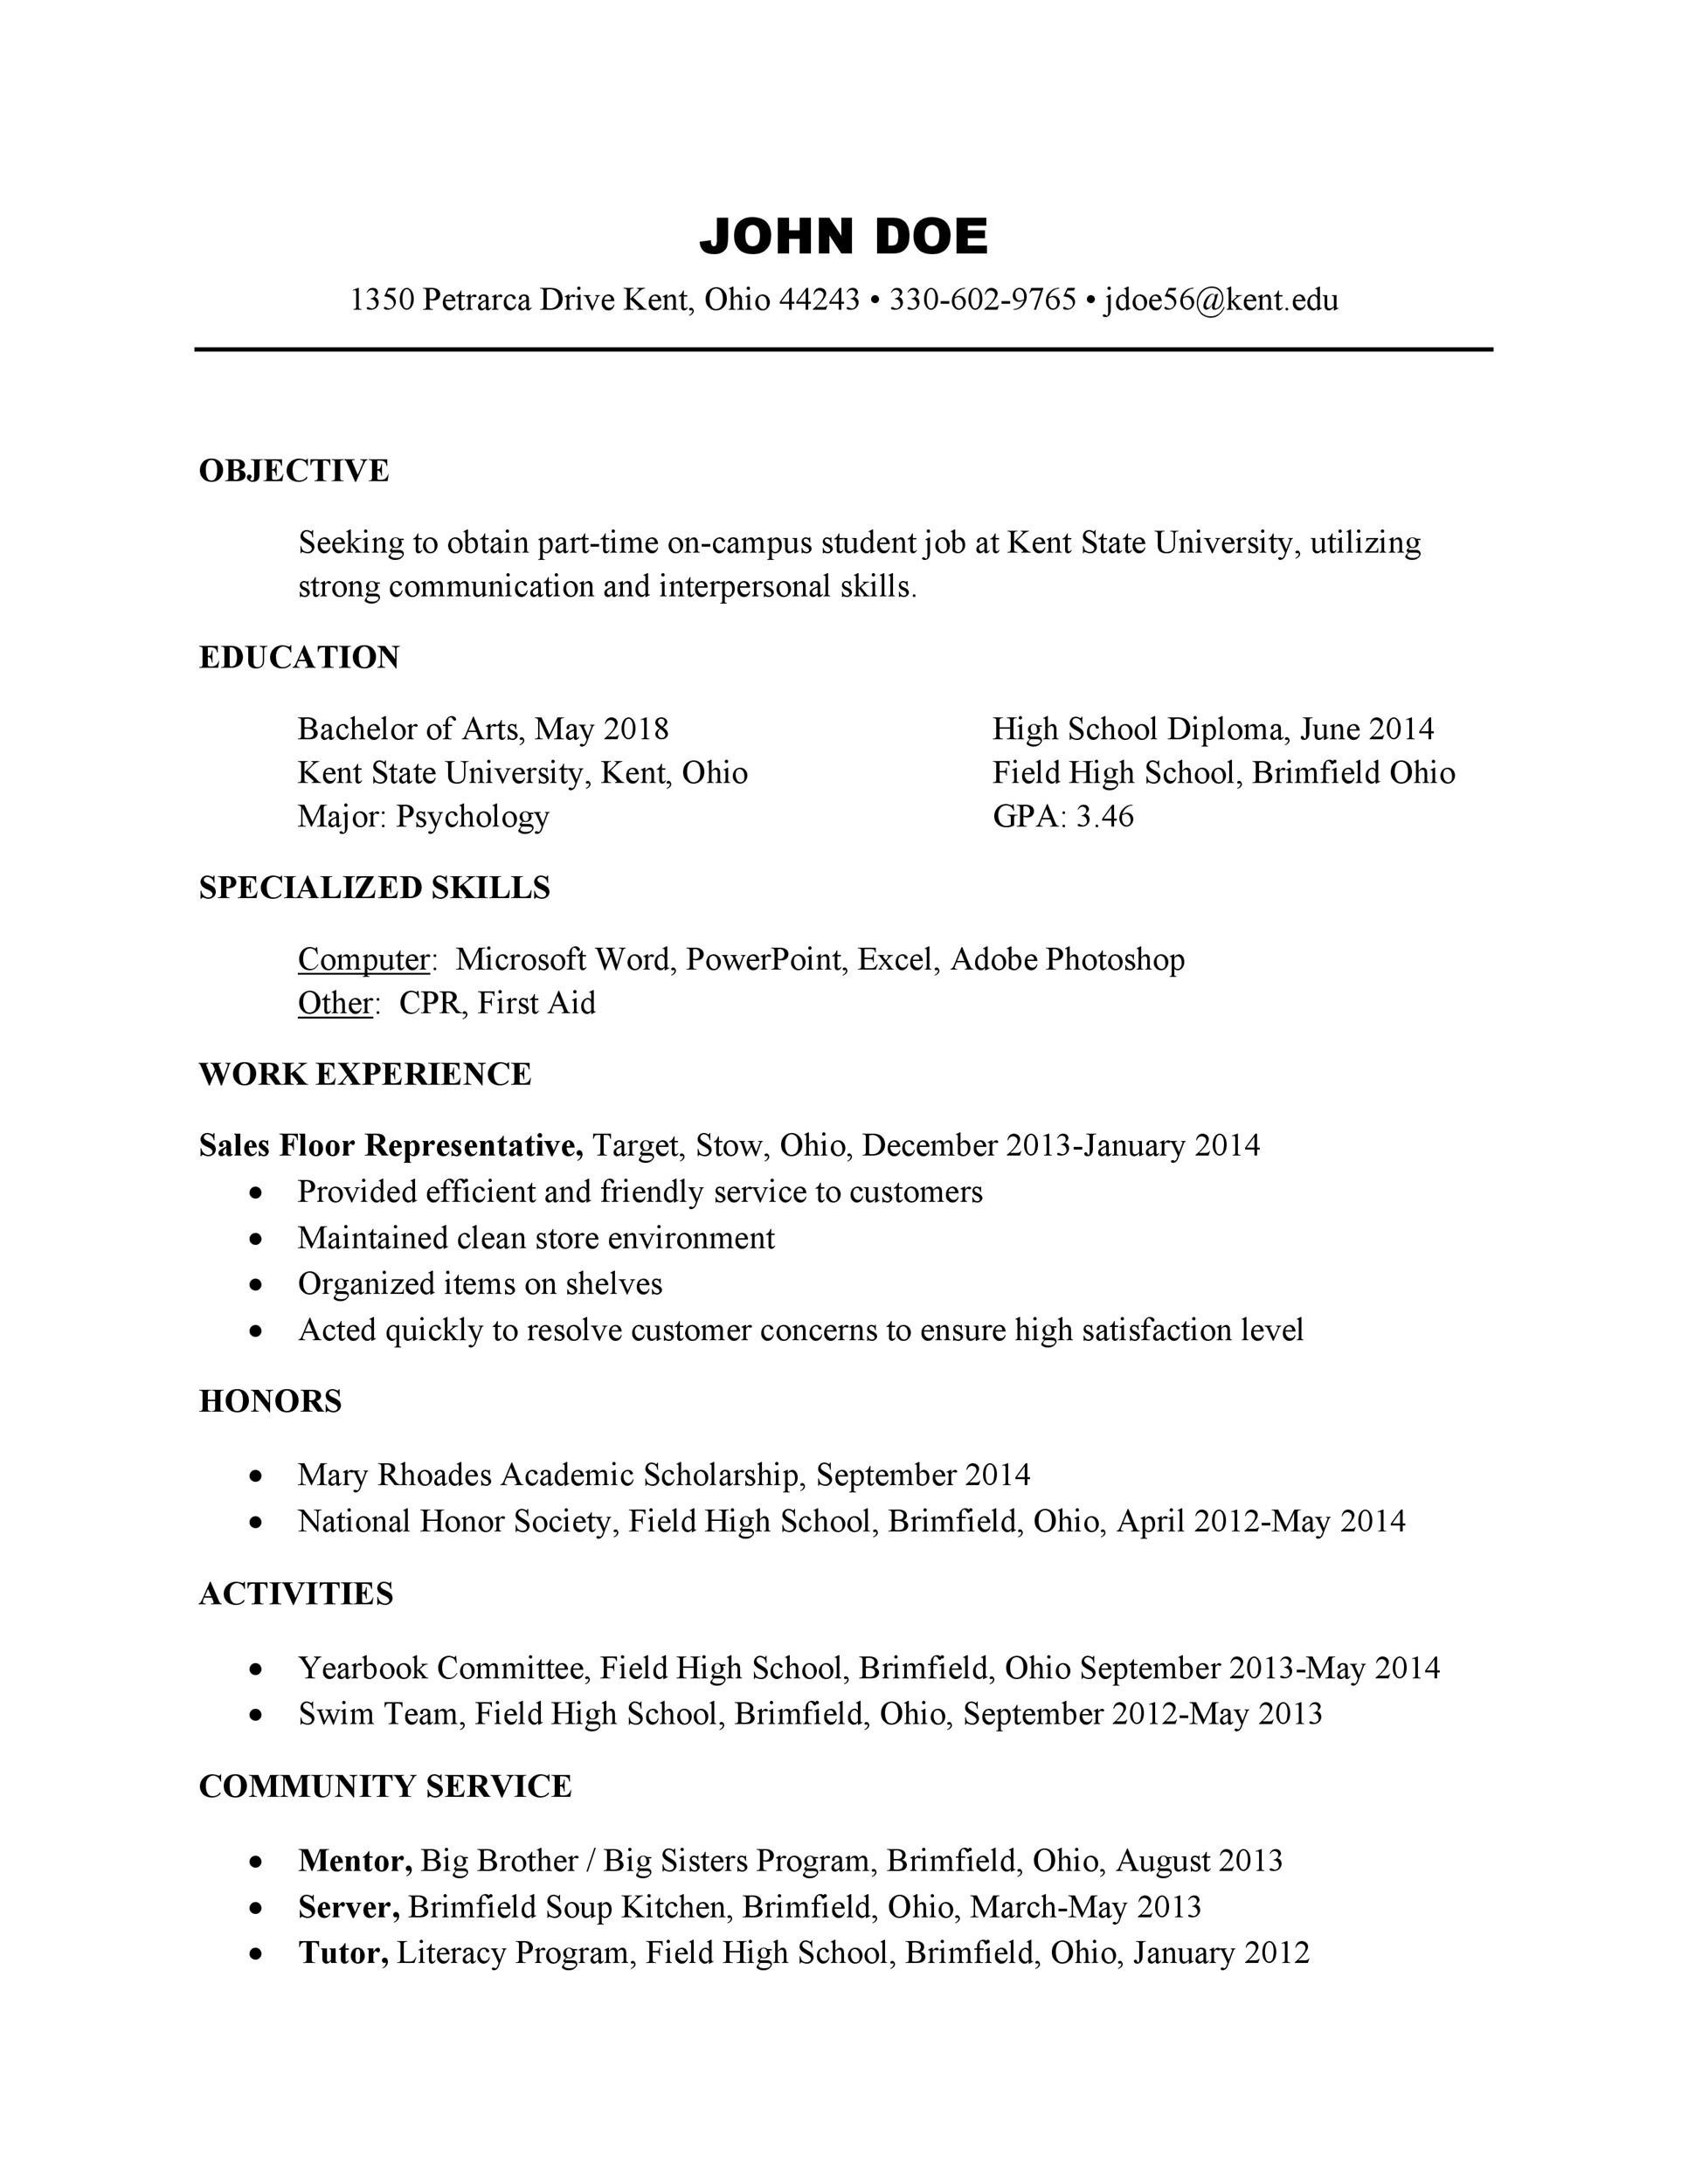 resume format for appearing students